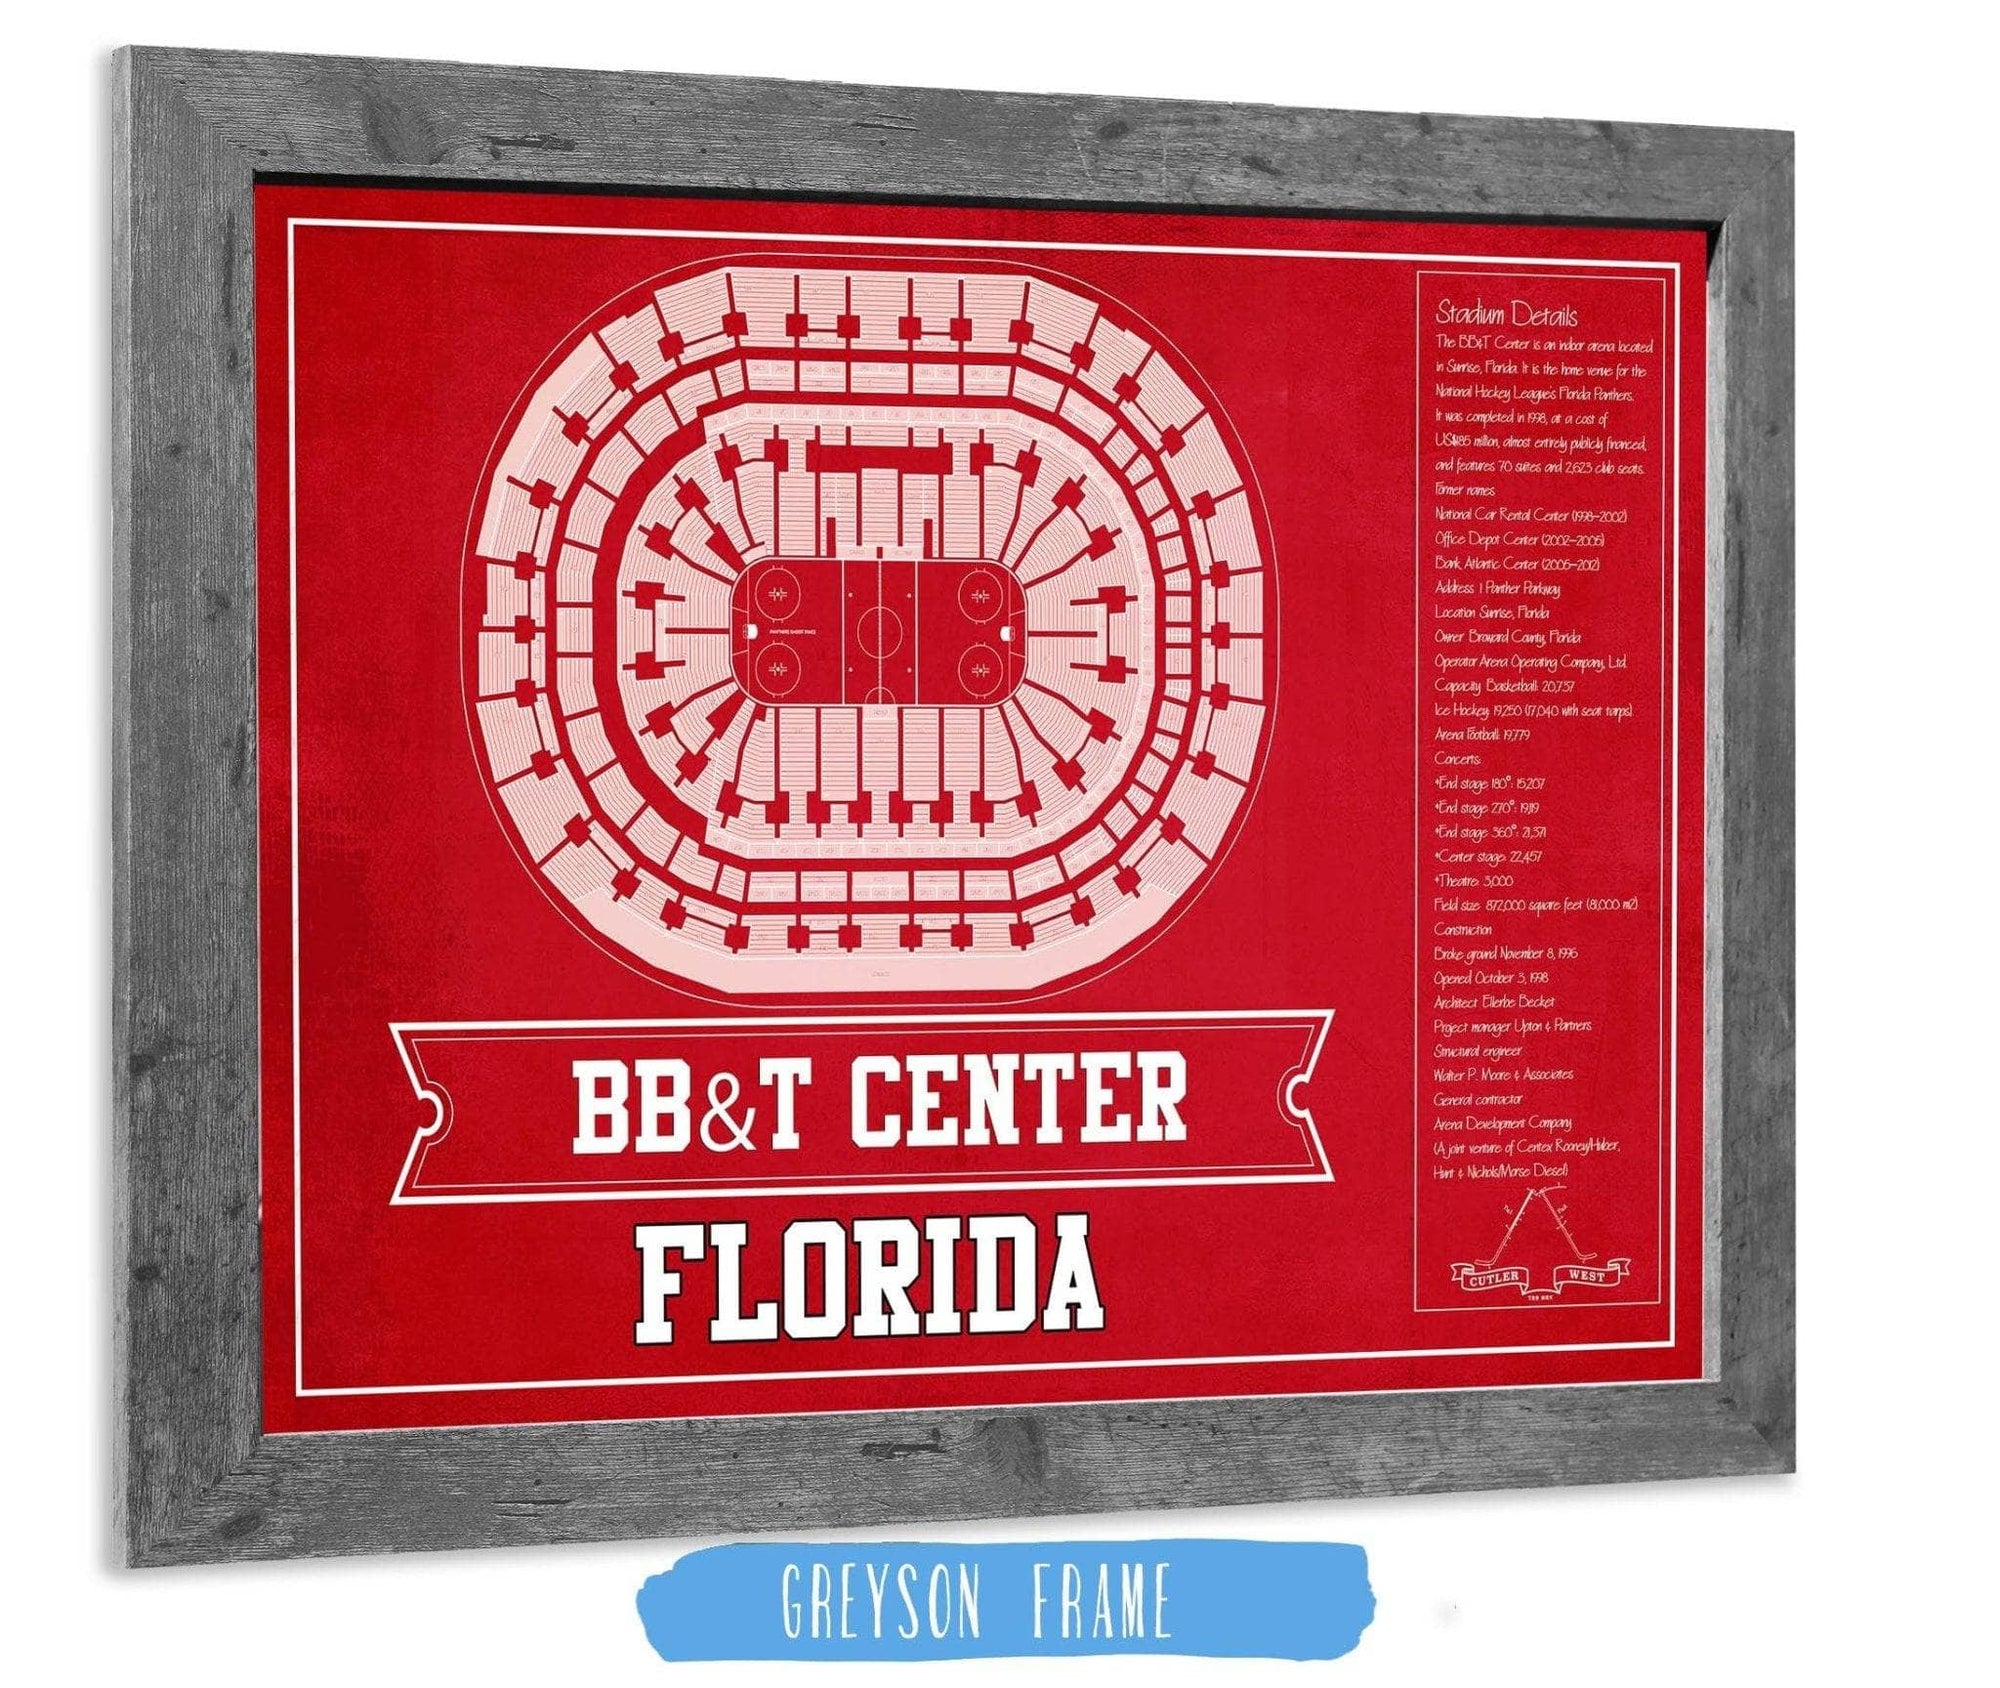 Cutler West 14" x 11" / Greyson Frame Florida Panthers BB&T Center Seating Chart - Vintage Hockey Team Color Print 659981334-TEAM